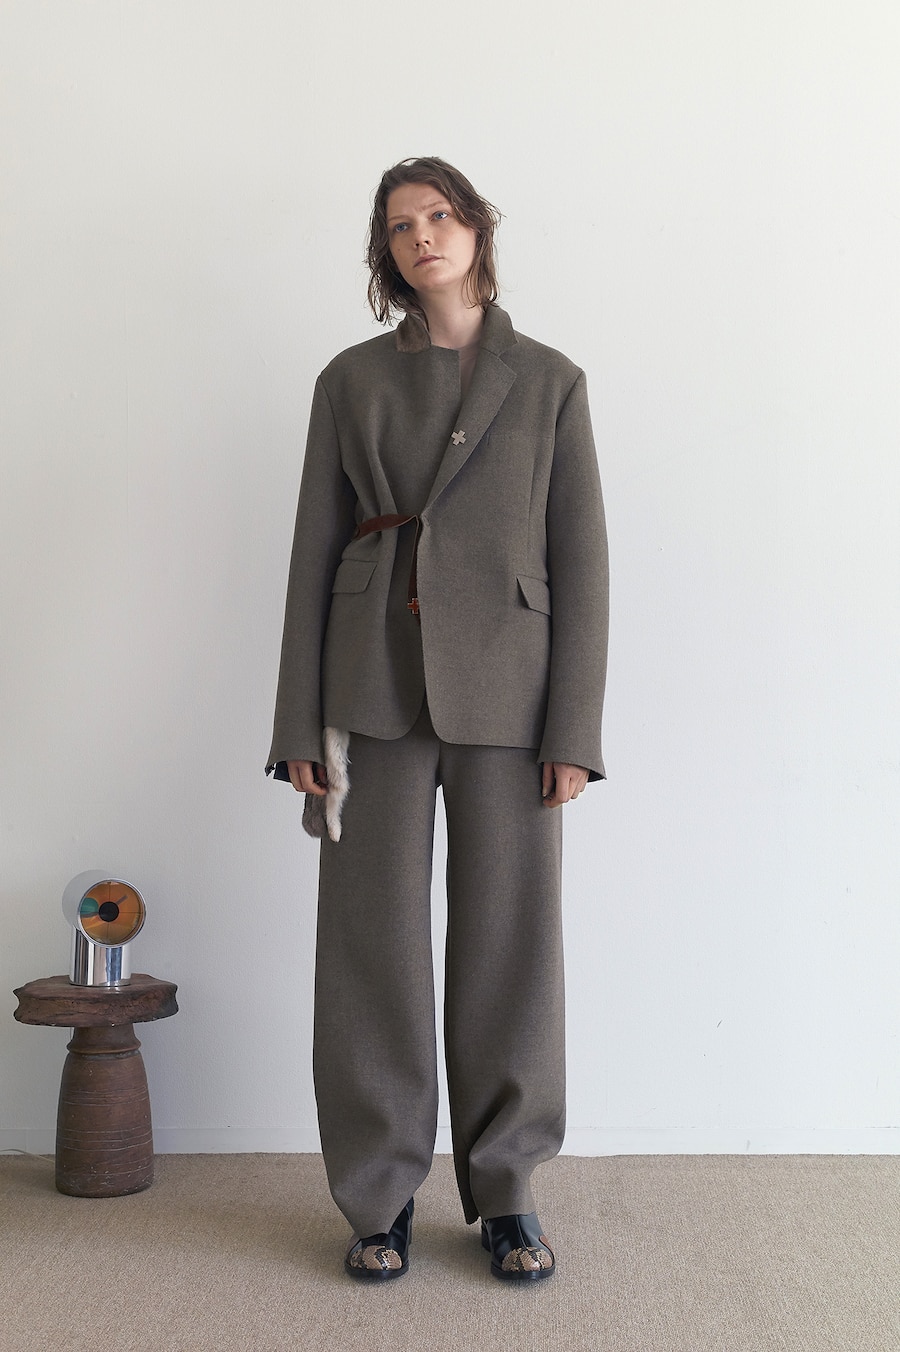 SUNSEA AW21 DELIVERY - WEEK 48 - NIGHTHAWKS